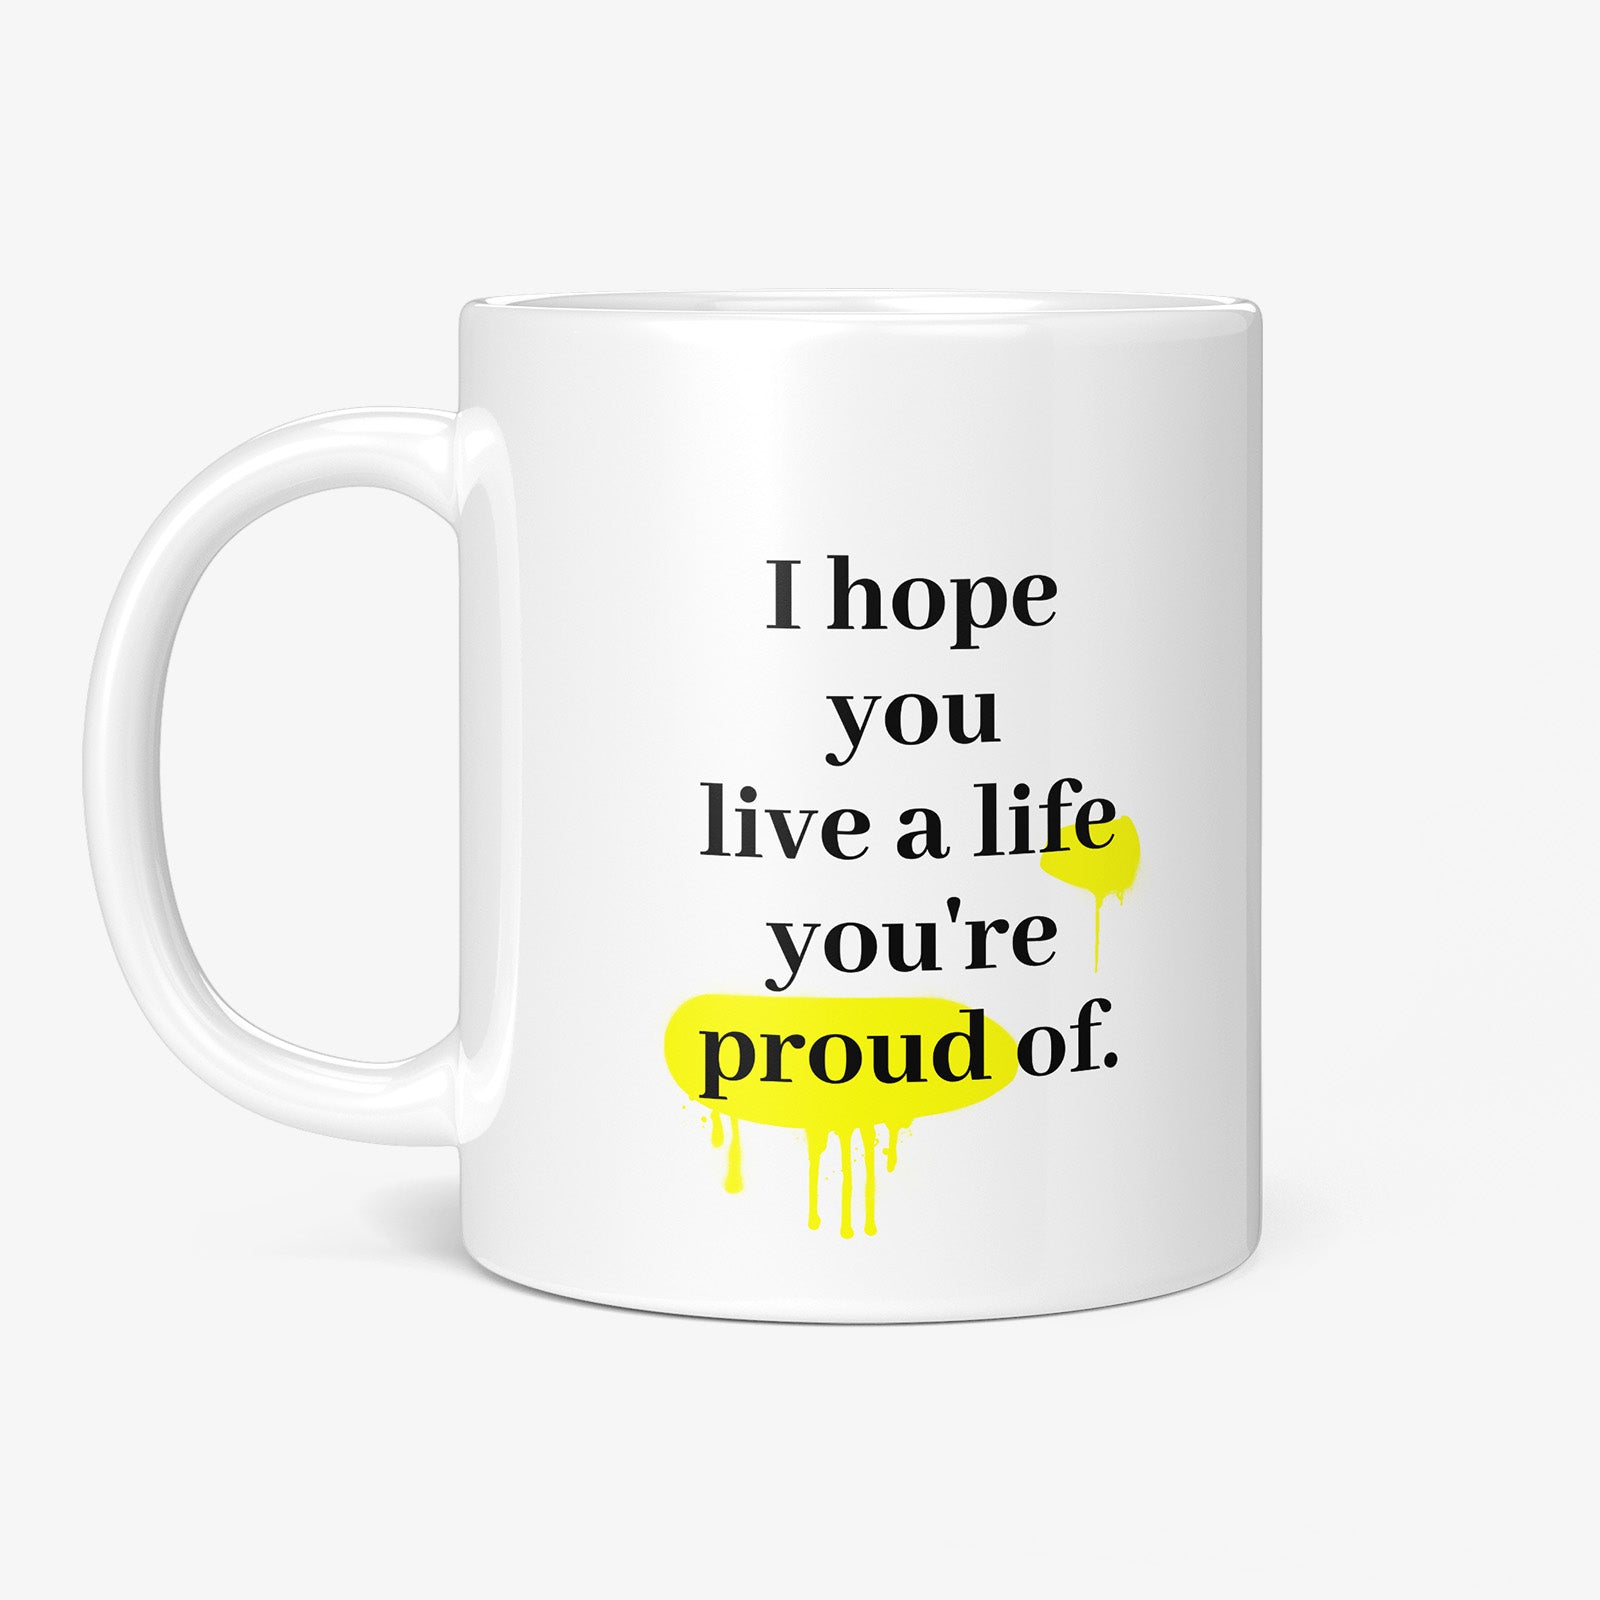 Be inspired by F. Scott Fitzgerald's famous quote, "I hope you live a life you're proud of" on this white and glossy 11oz coffee mug with the handle on the left.